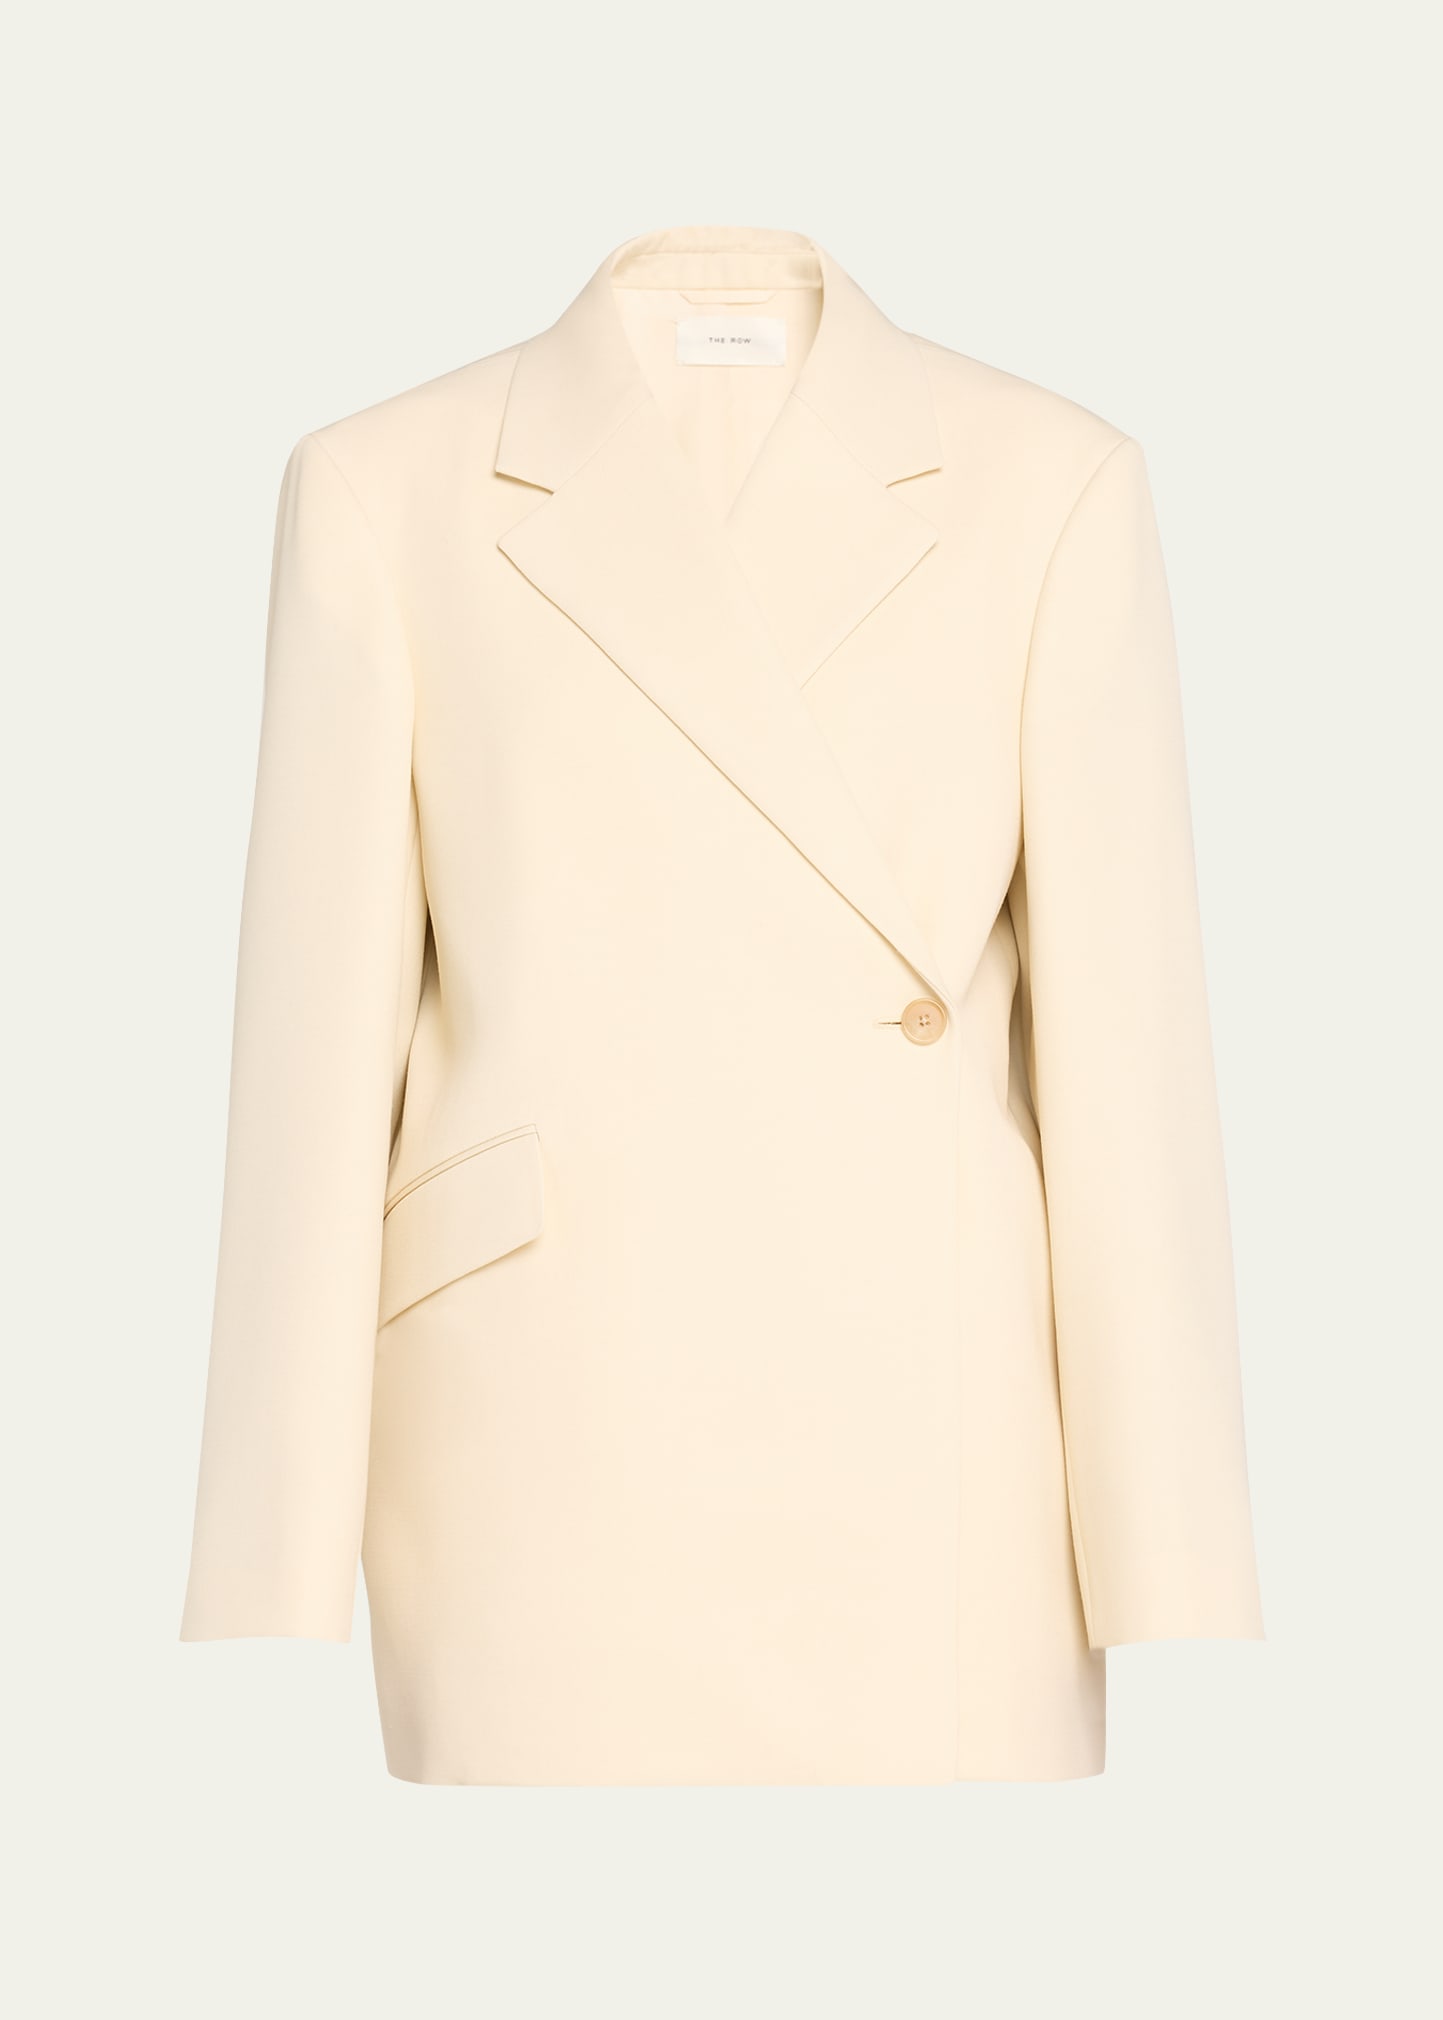 Shop The Row Azul One-button Wool Jacket, Ivory